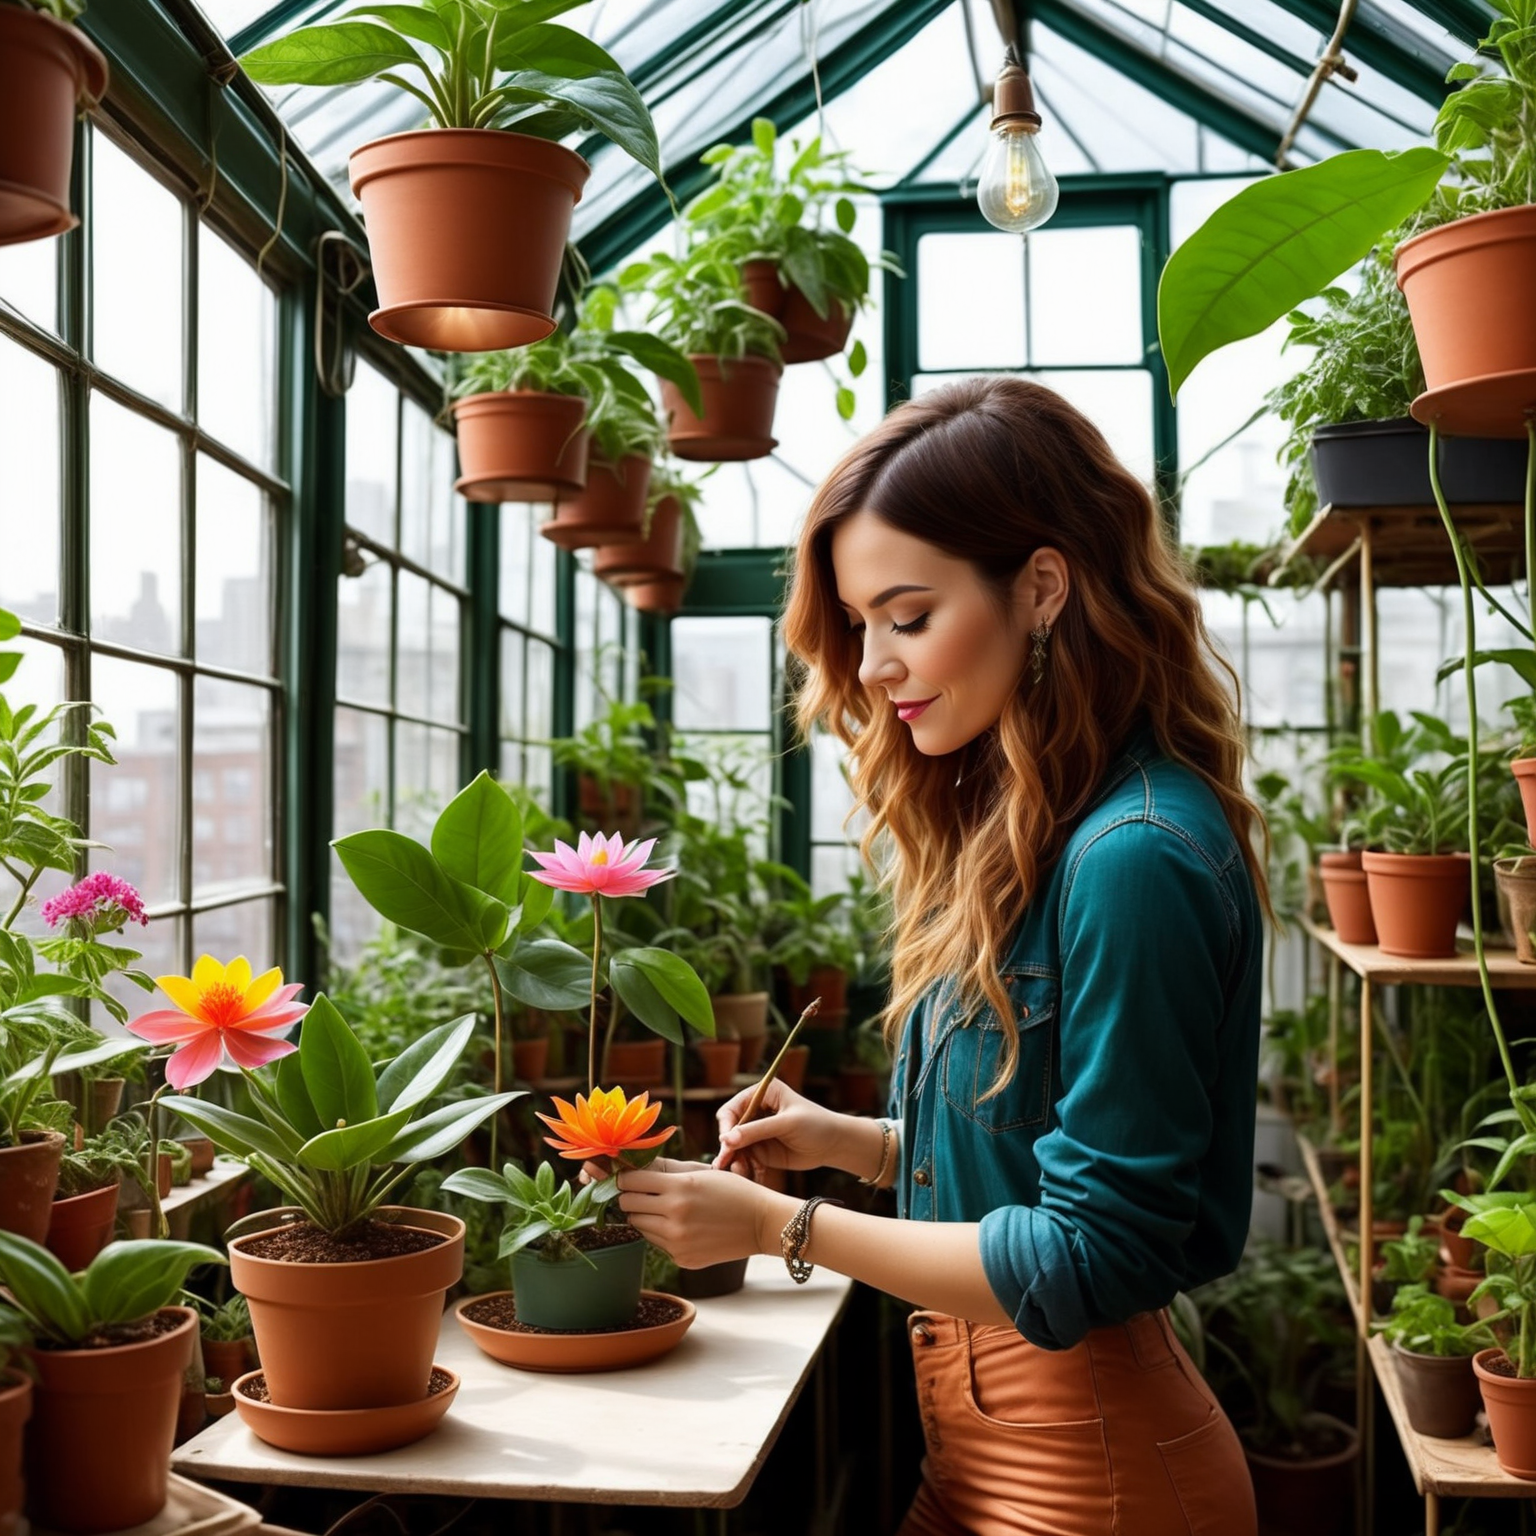 15. A hipster houseplant enthusiast caring for a rare magical singing flower in her urban greenhouse loft apartment. Vibra...